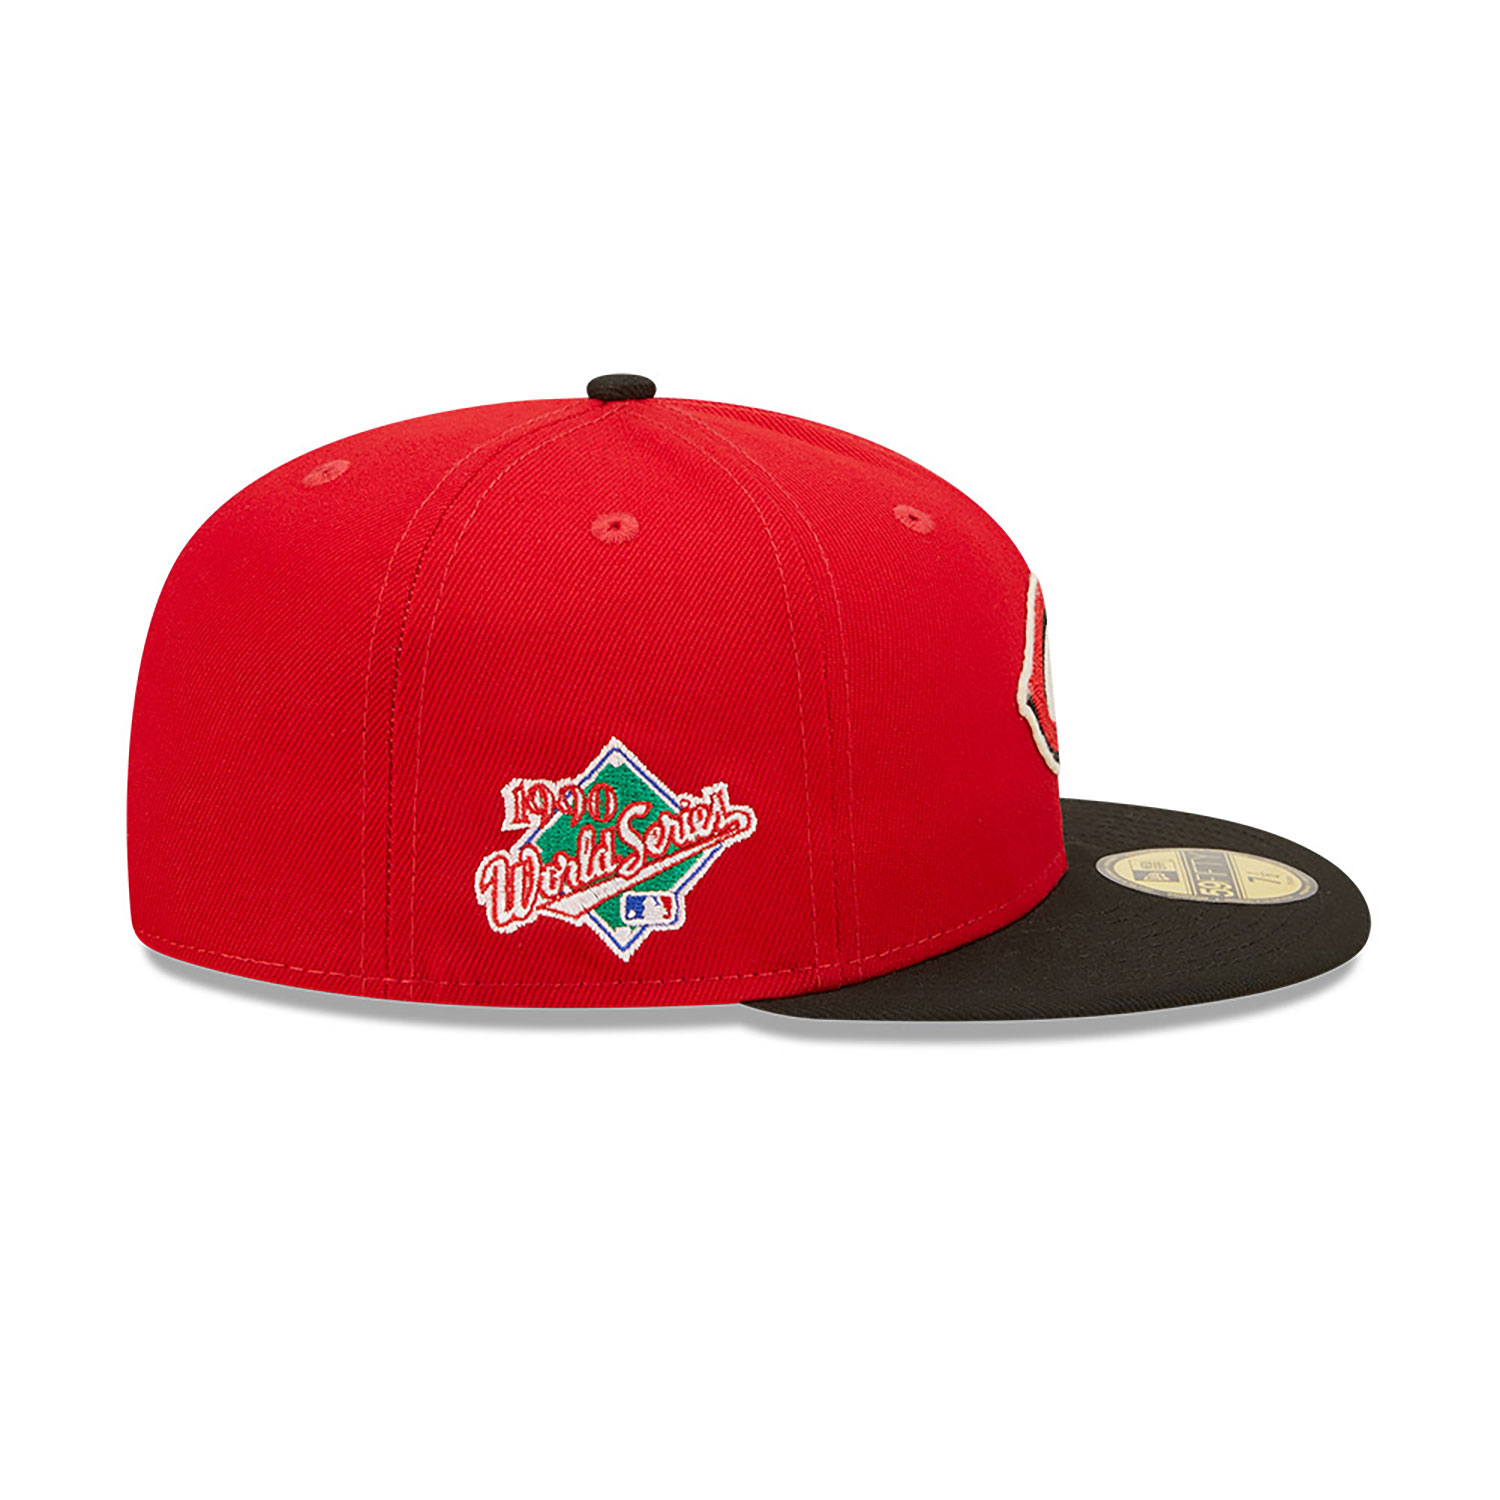 Official New Era Letterman Cincinnati Reds Red 59FIFTY Fitted Cap B9592 ...